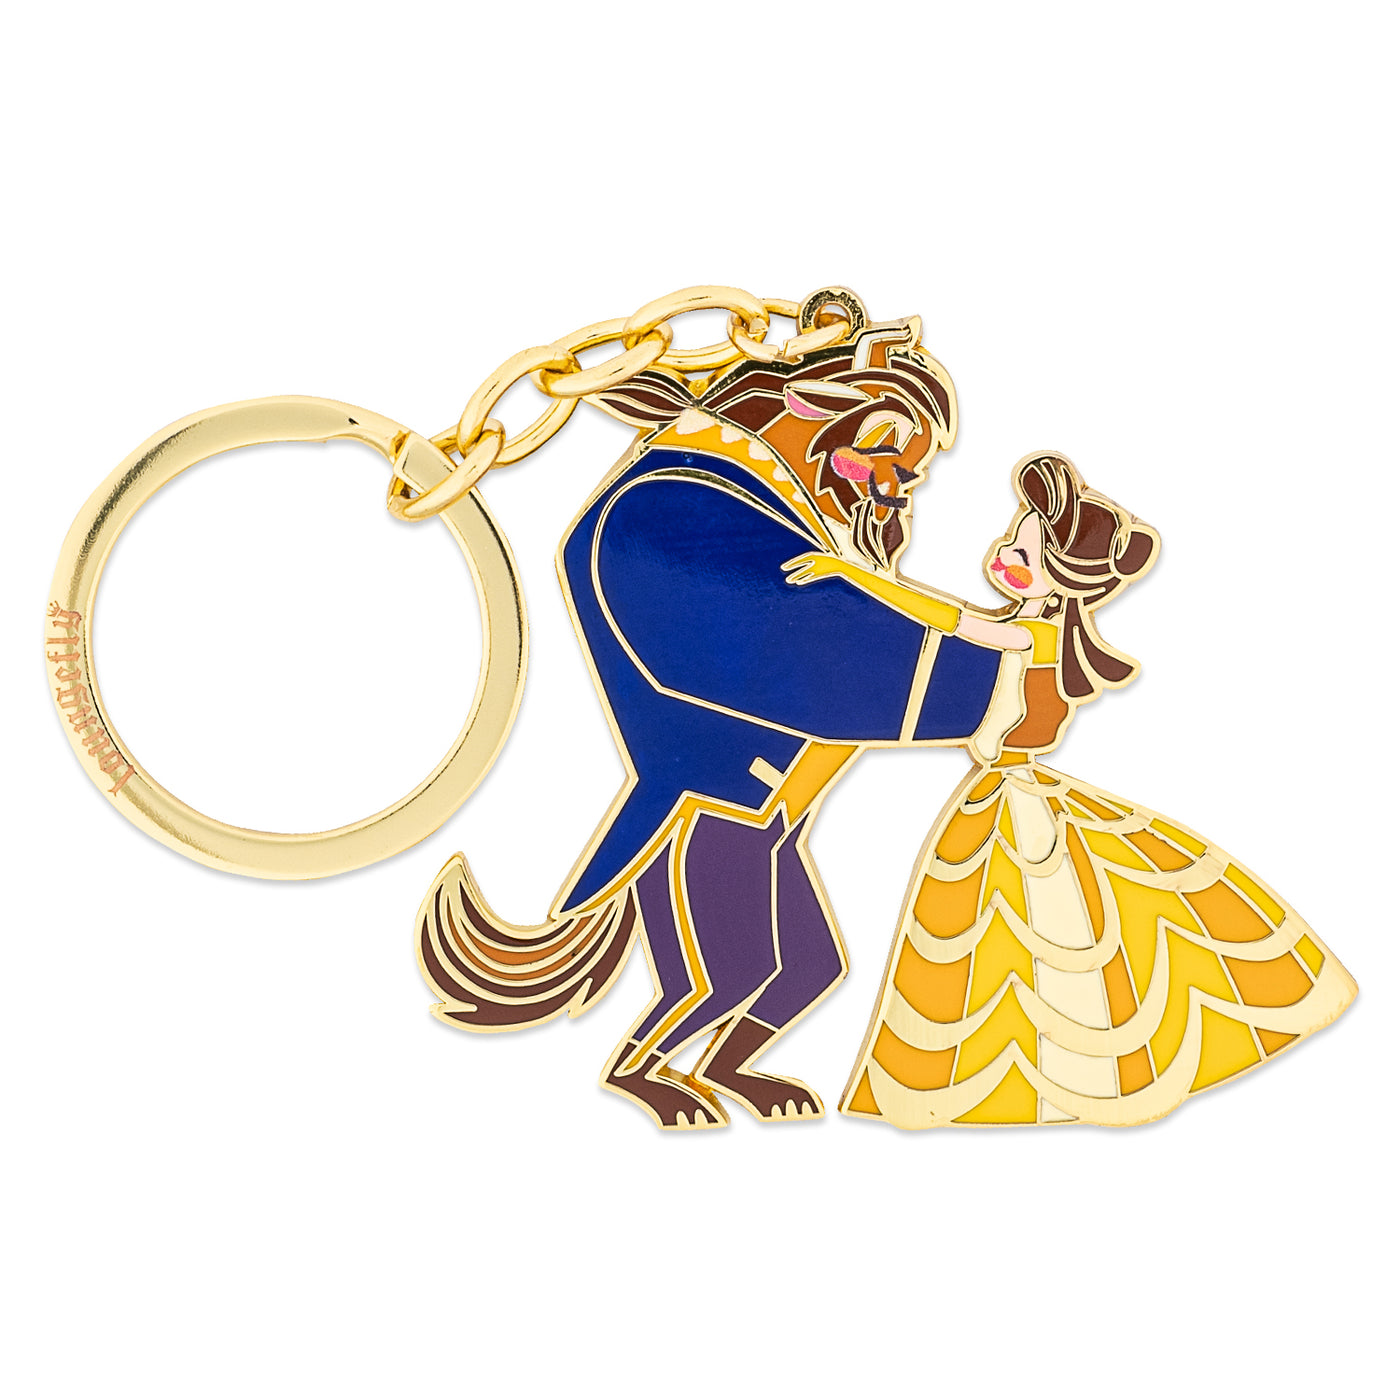 Loungefly Disney Beauty and the Beast Dancing Keychain